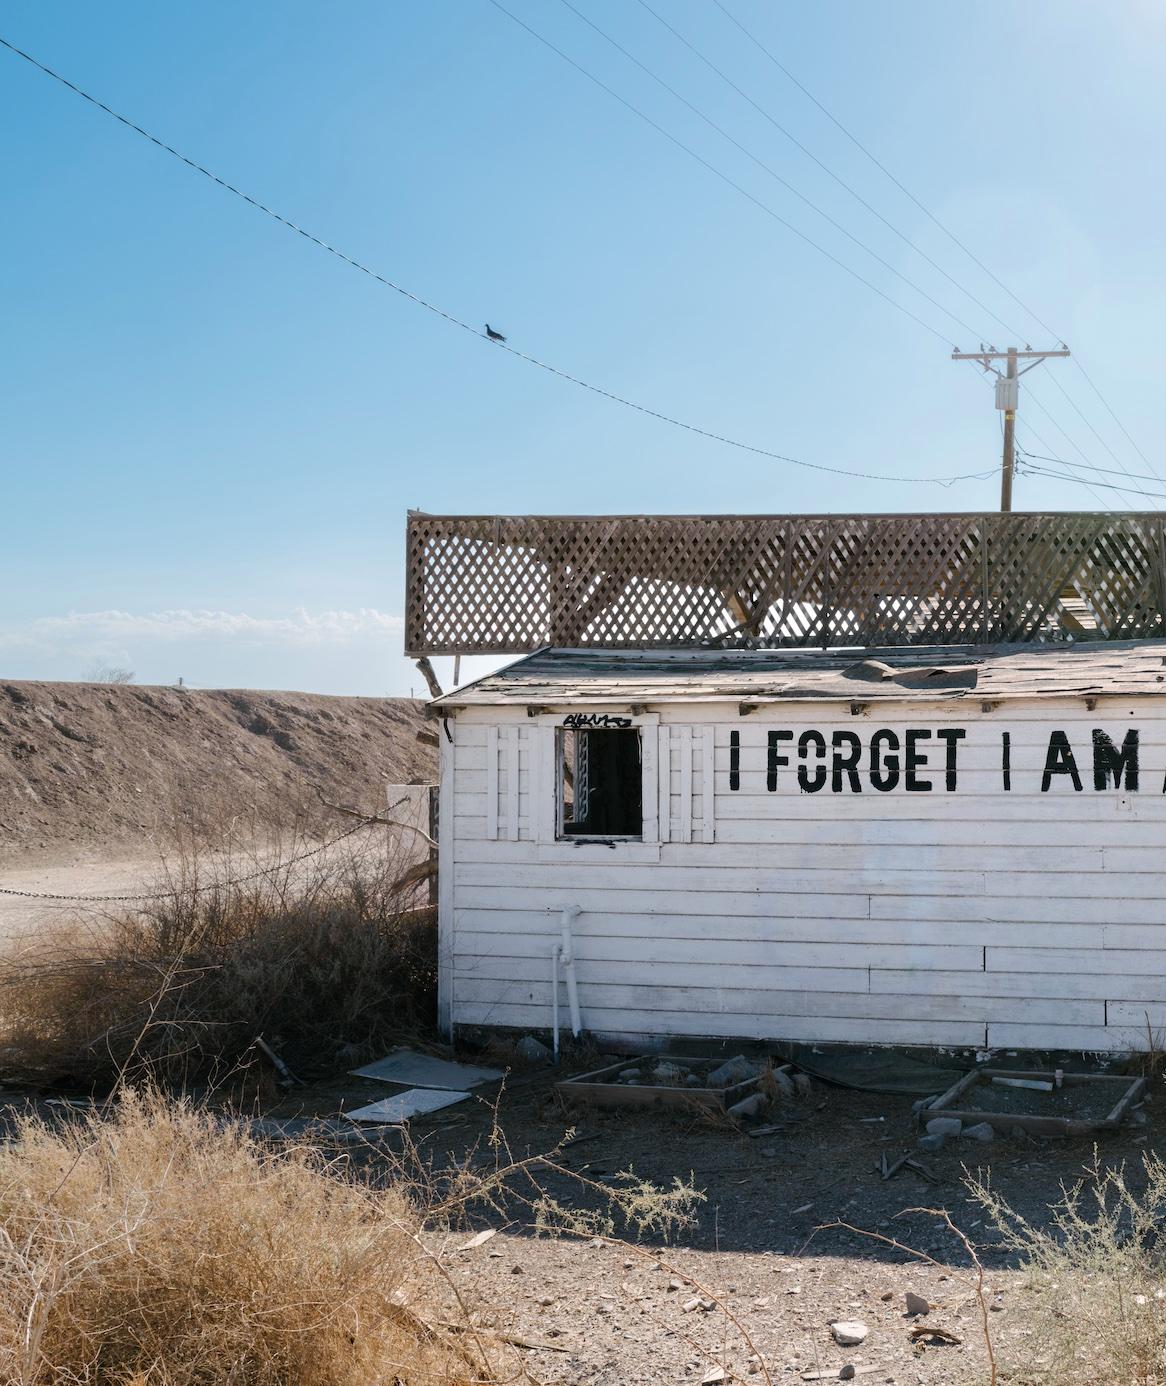 Forget, 2022, Bombay Beach, CA, USA - Contemporary Photograph by Philippe Blayo